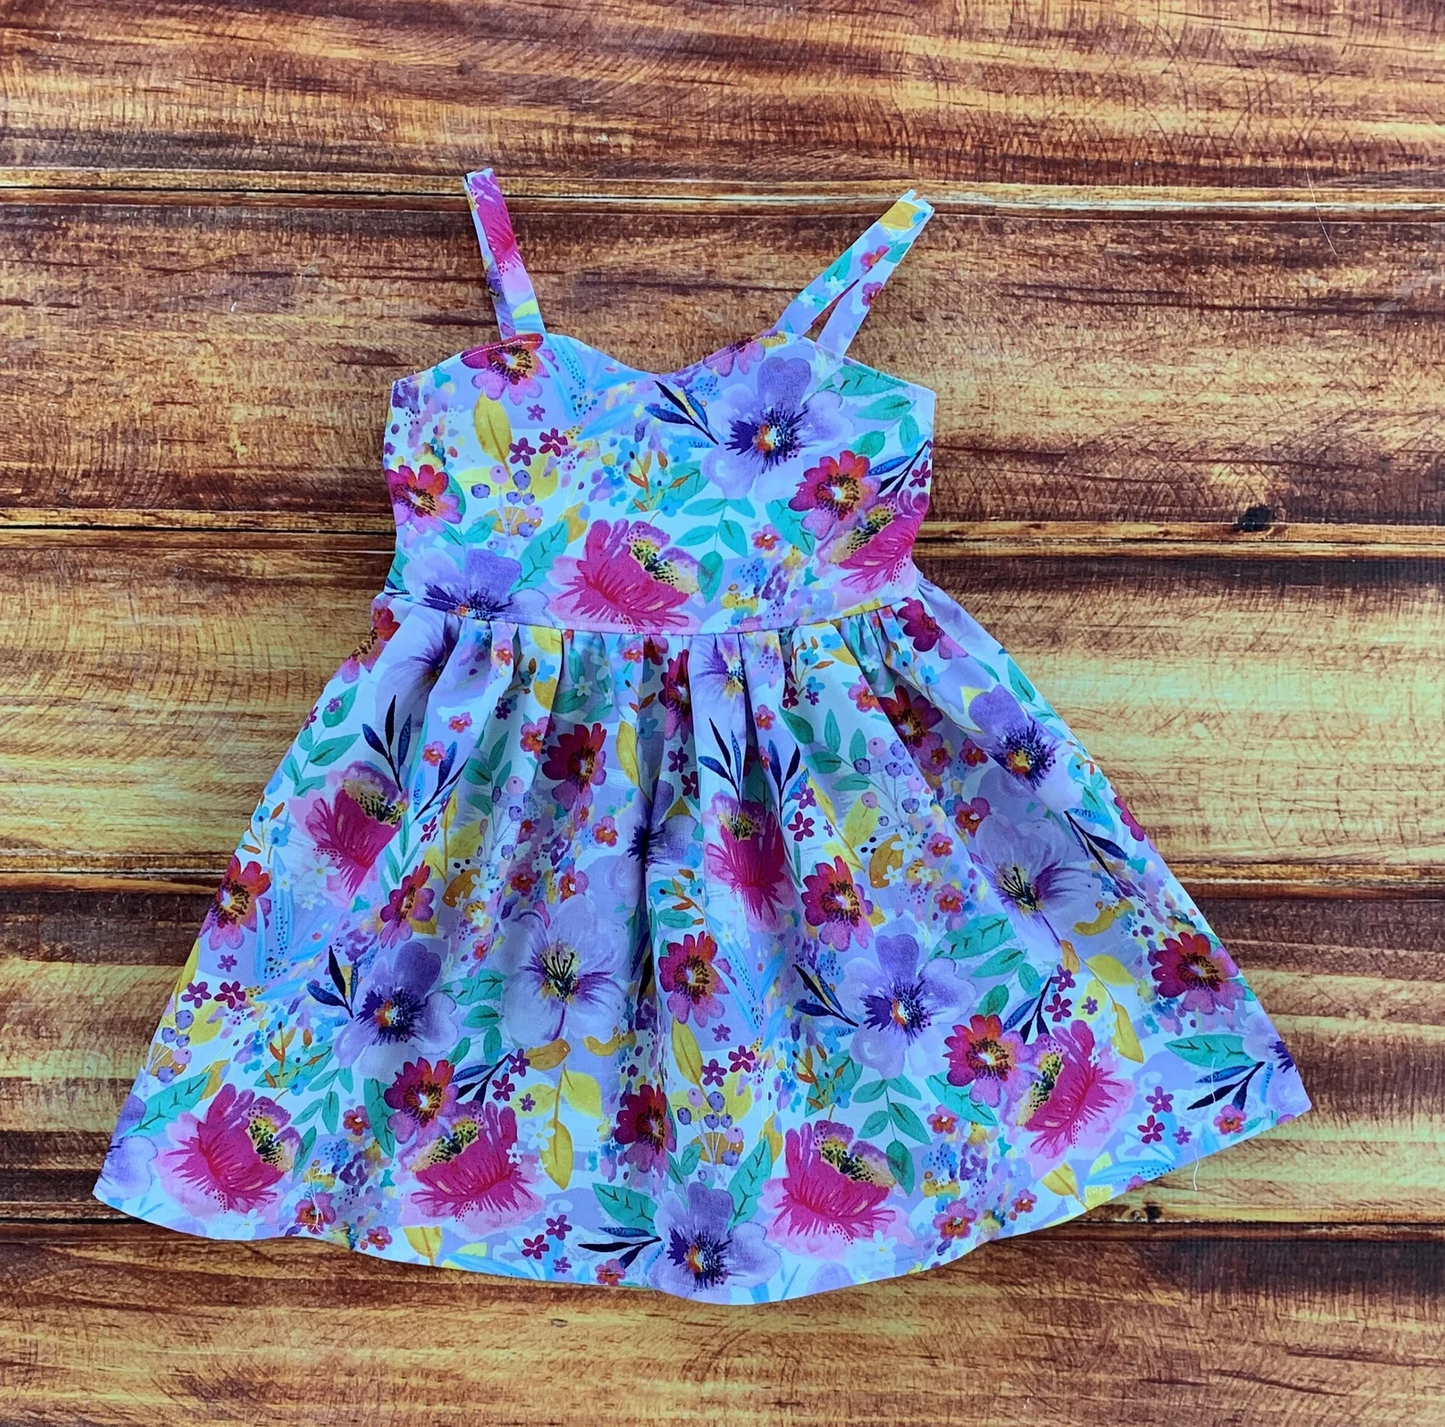 baby girls boutique floral dress